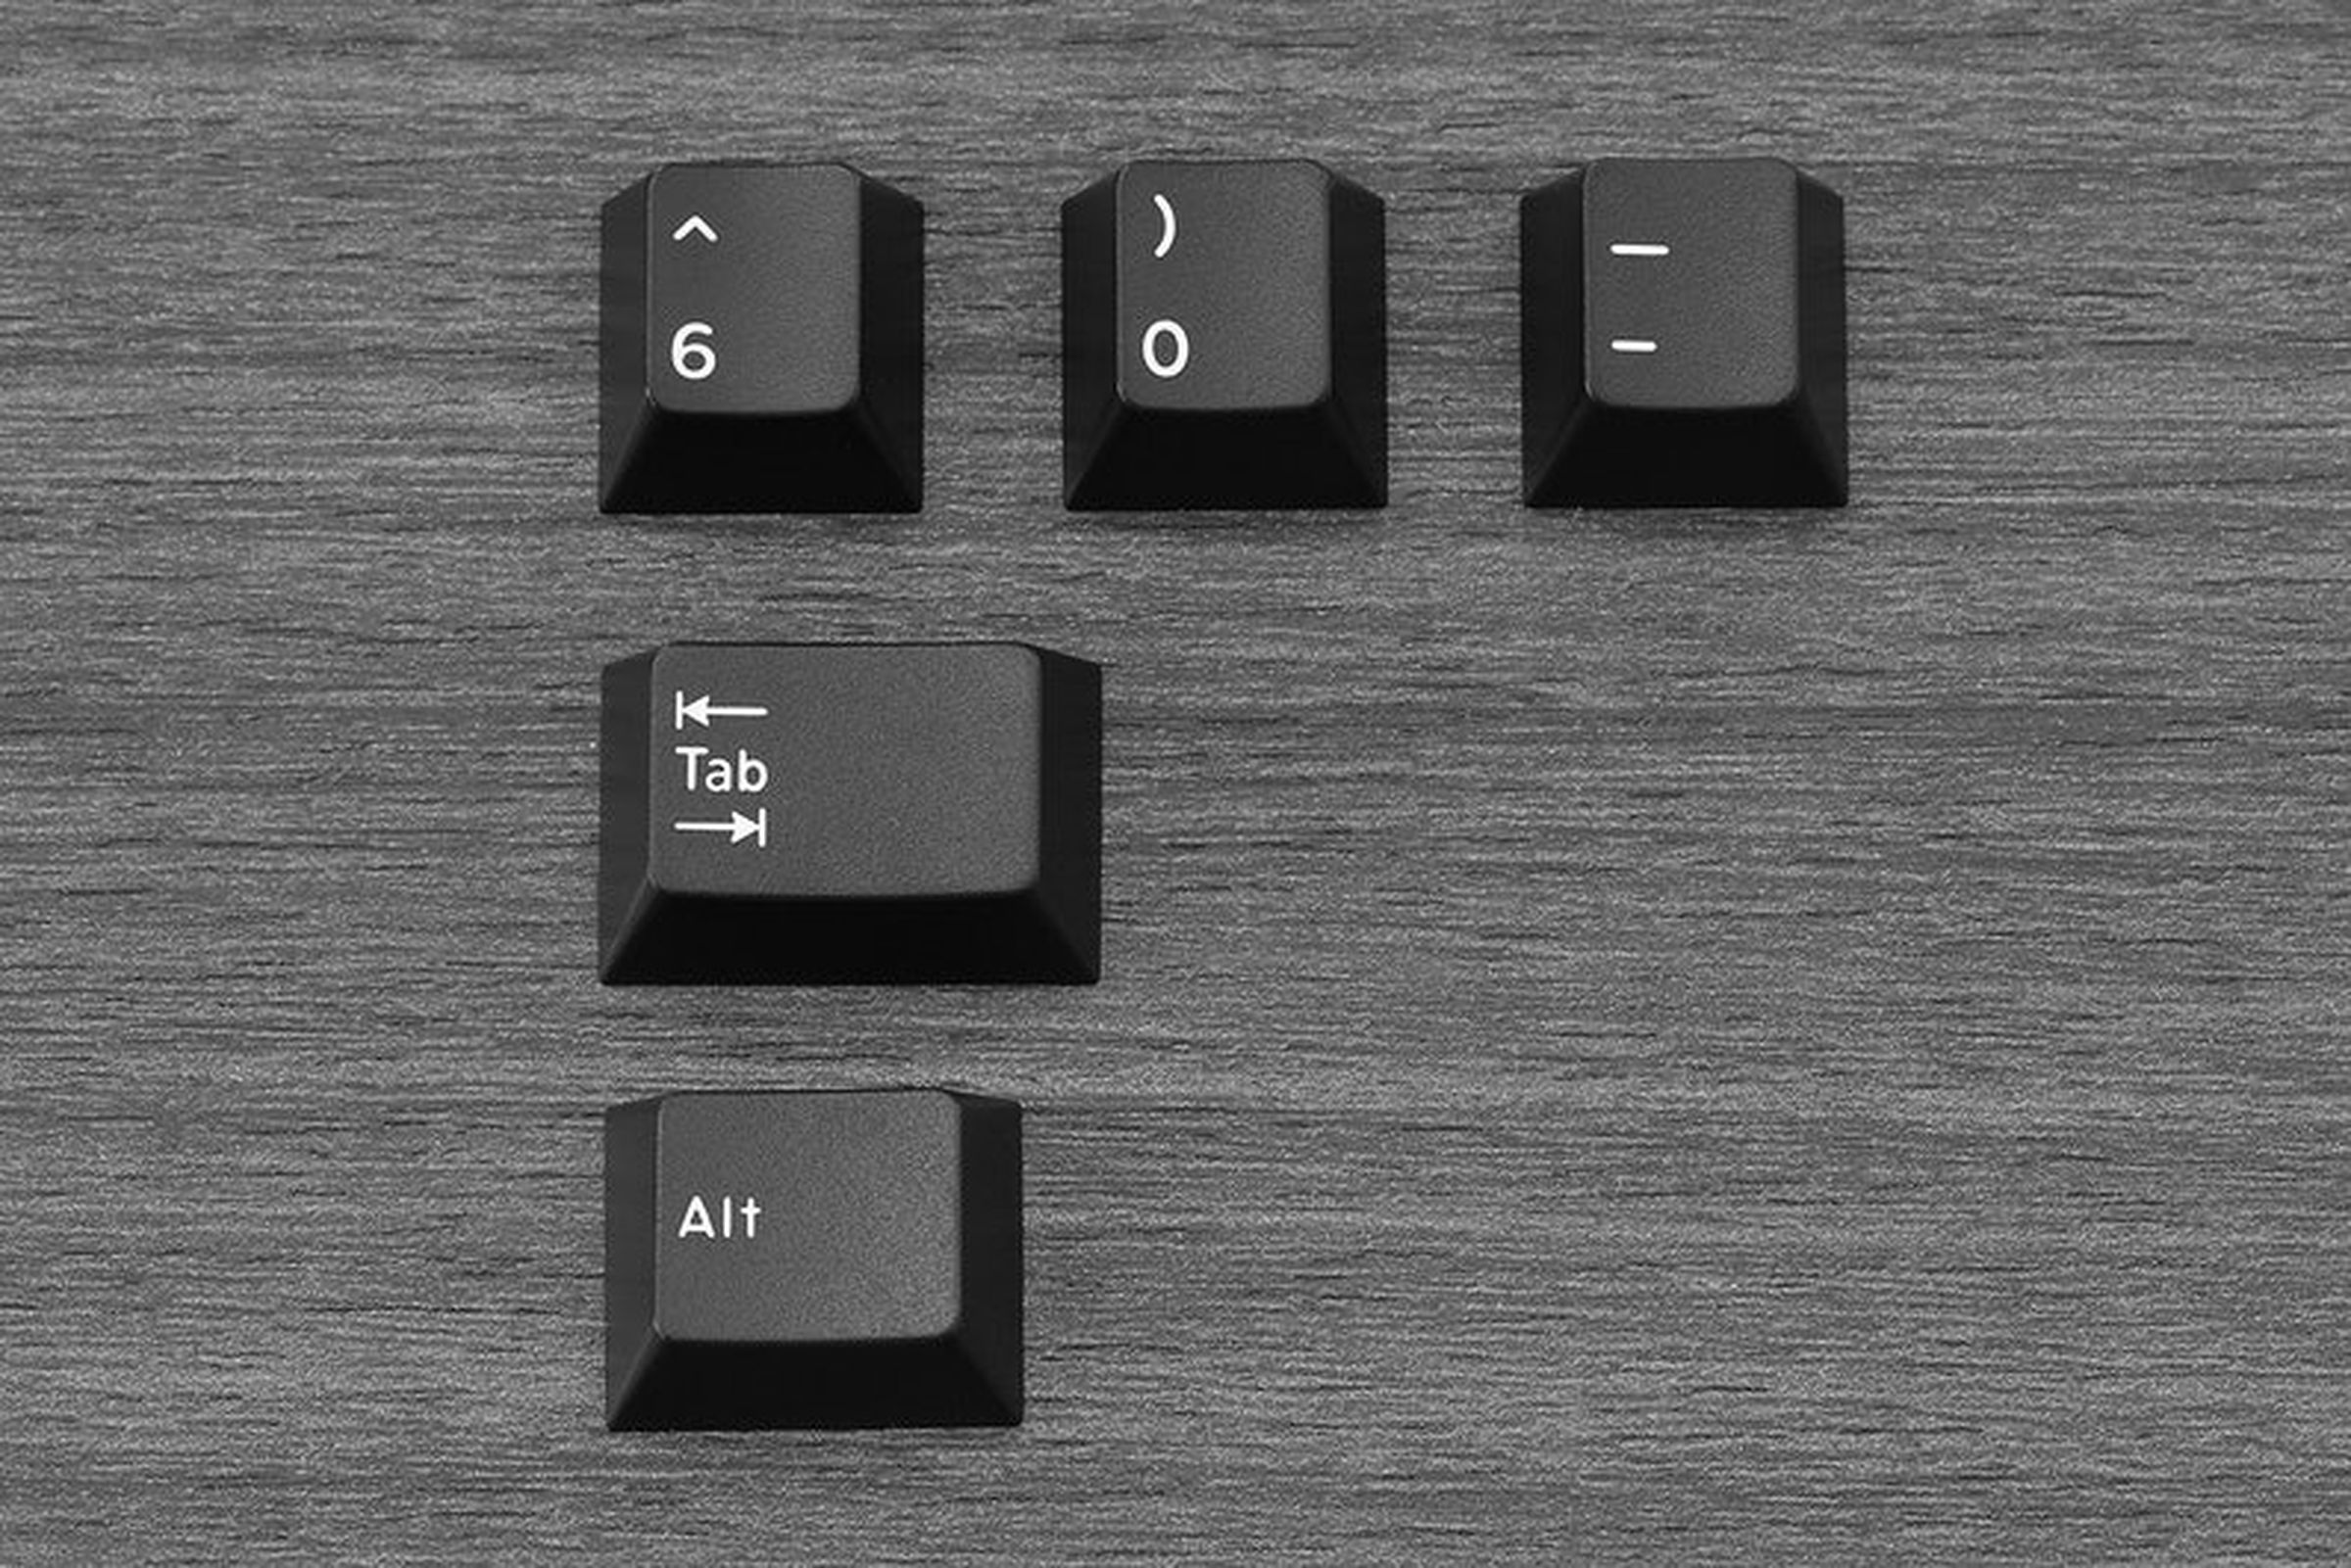 Drop says it’s paid close attention to the placement and proportions of DCX’s keycap legends. 